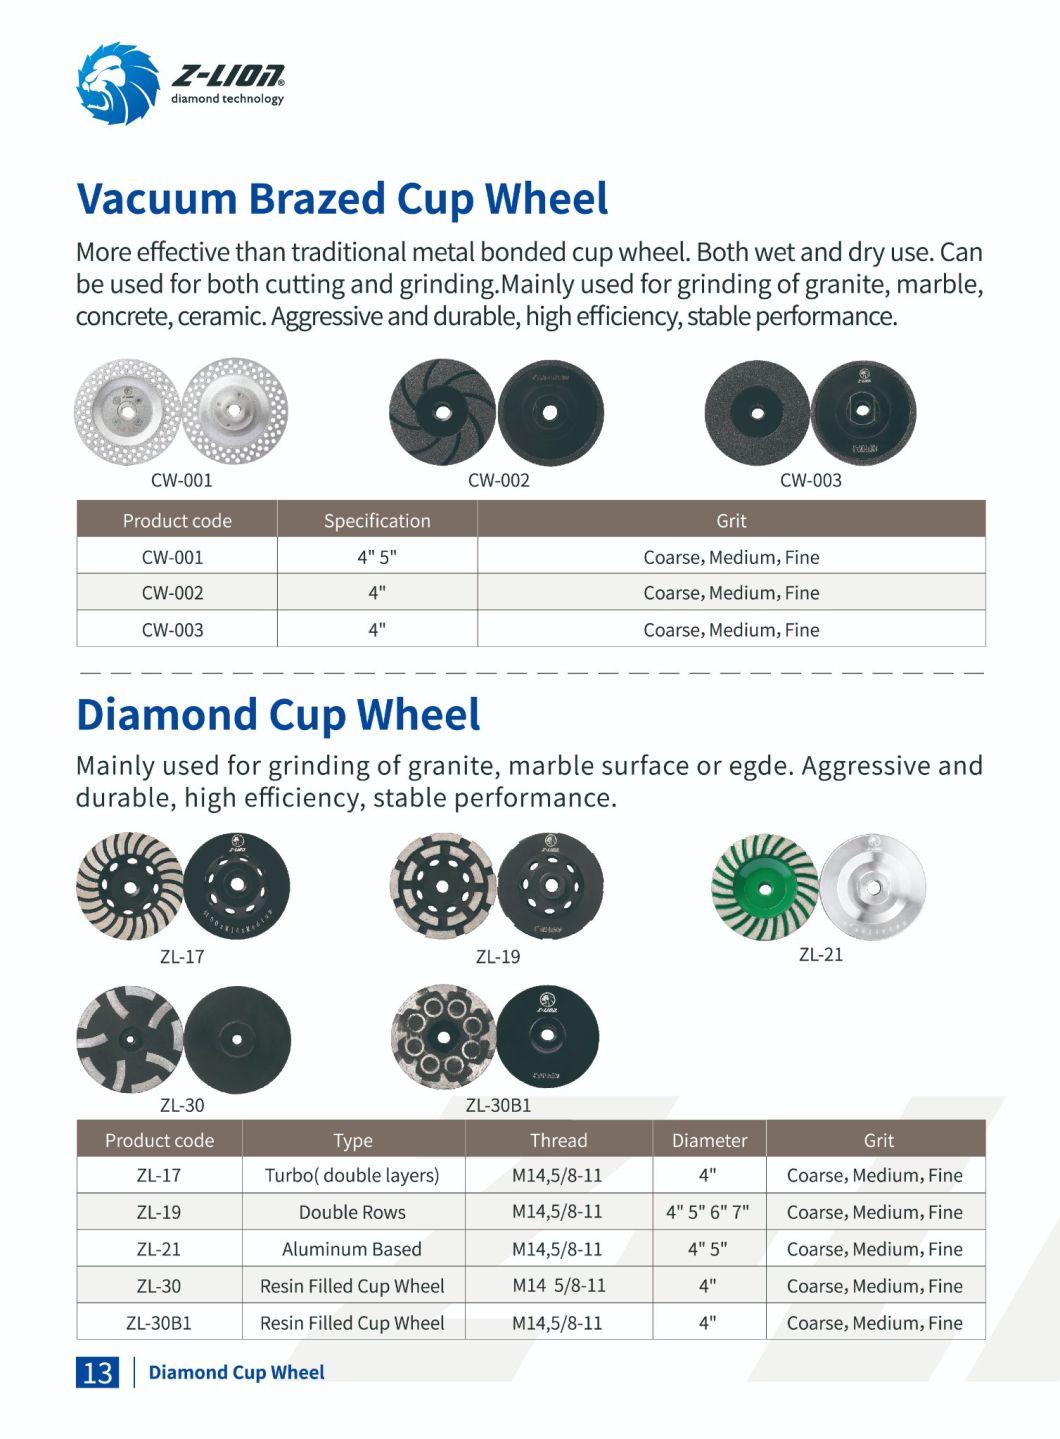 High Quality Vacuum Brazed Cup Wheel for Stone and Ceramic, Concrete Cutting and Grinding